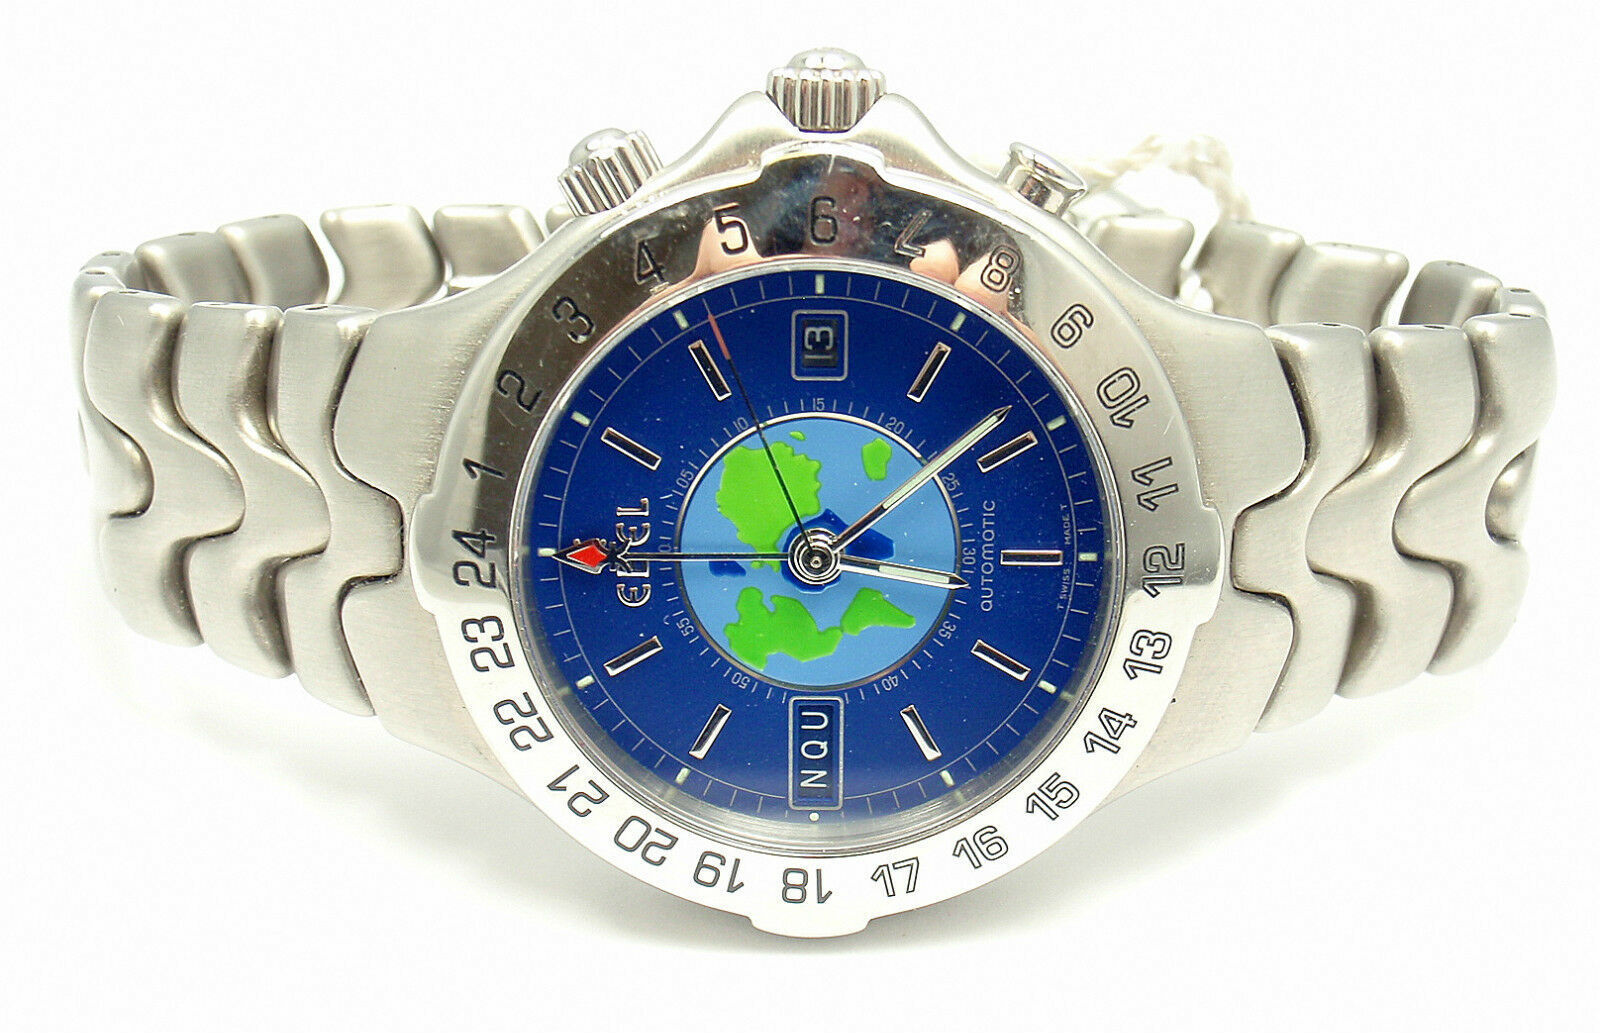 SHARP! AUTHENTIC EBEL STAINLESS STEEL BLUE DIAL SPORTWAVE WORLD TIME WATCH | Fortrove